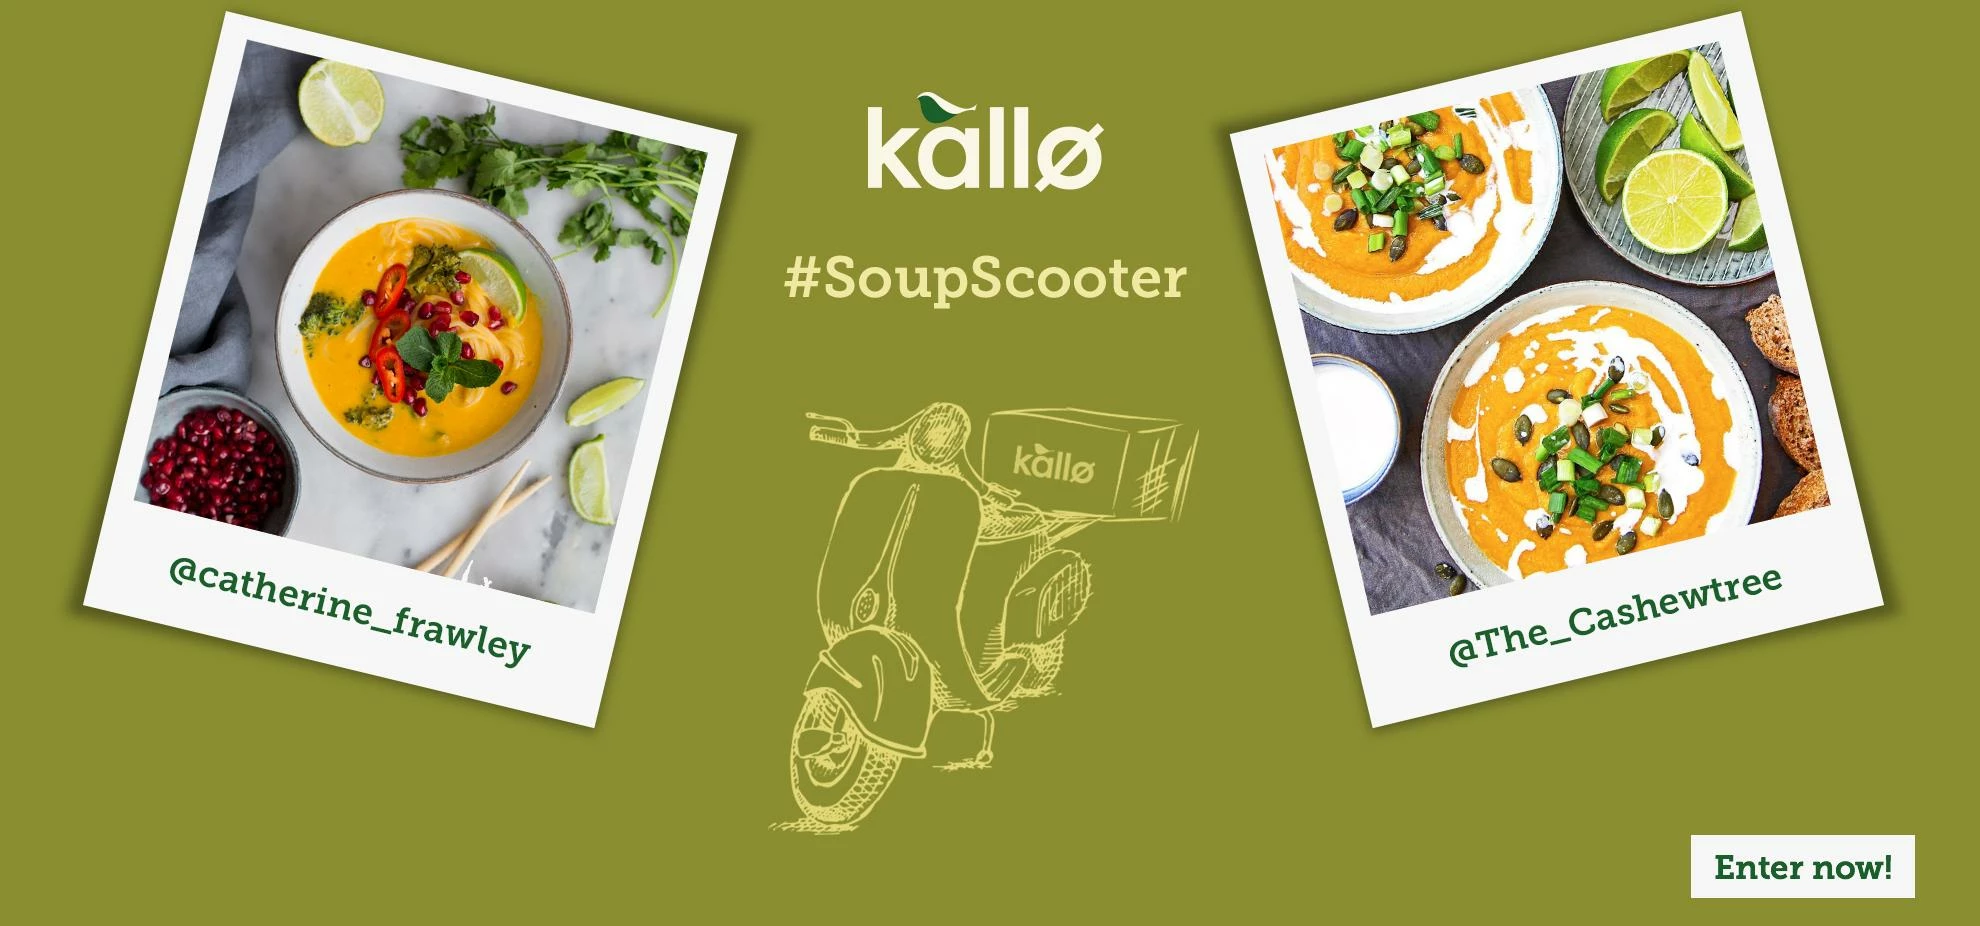 Kallø’s ‘Soup Scooter’ hits the streets as part of influencer-led campaign